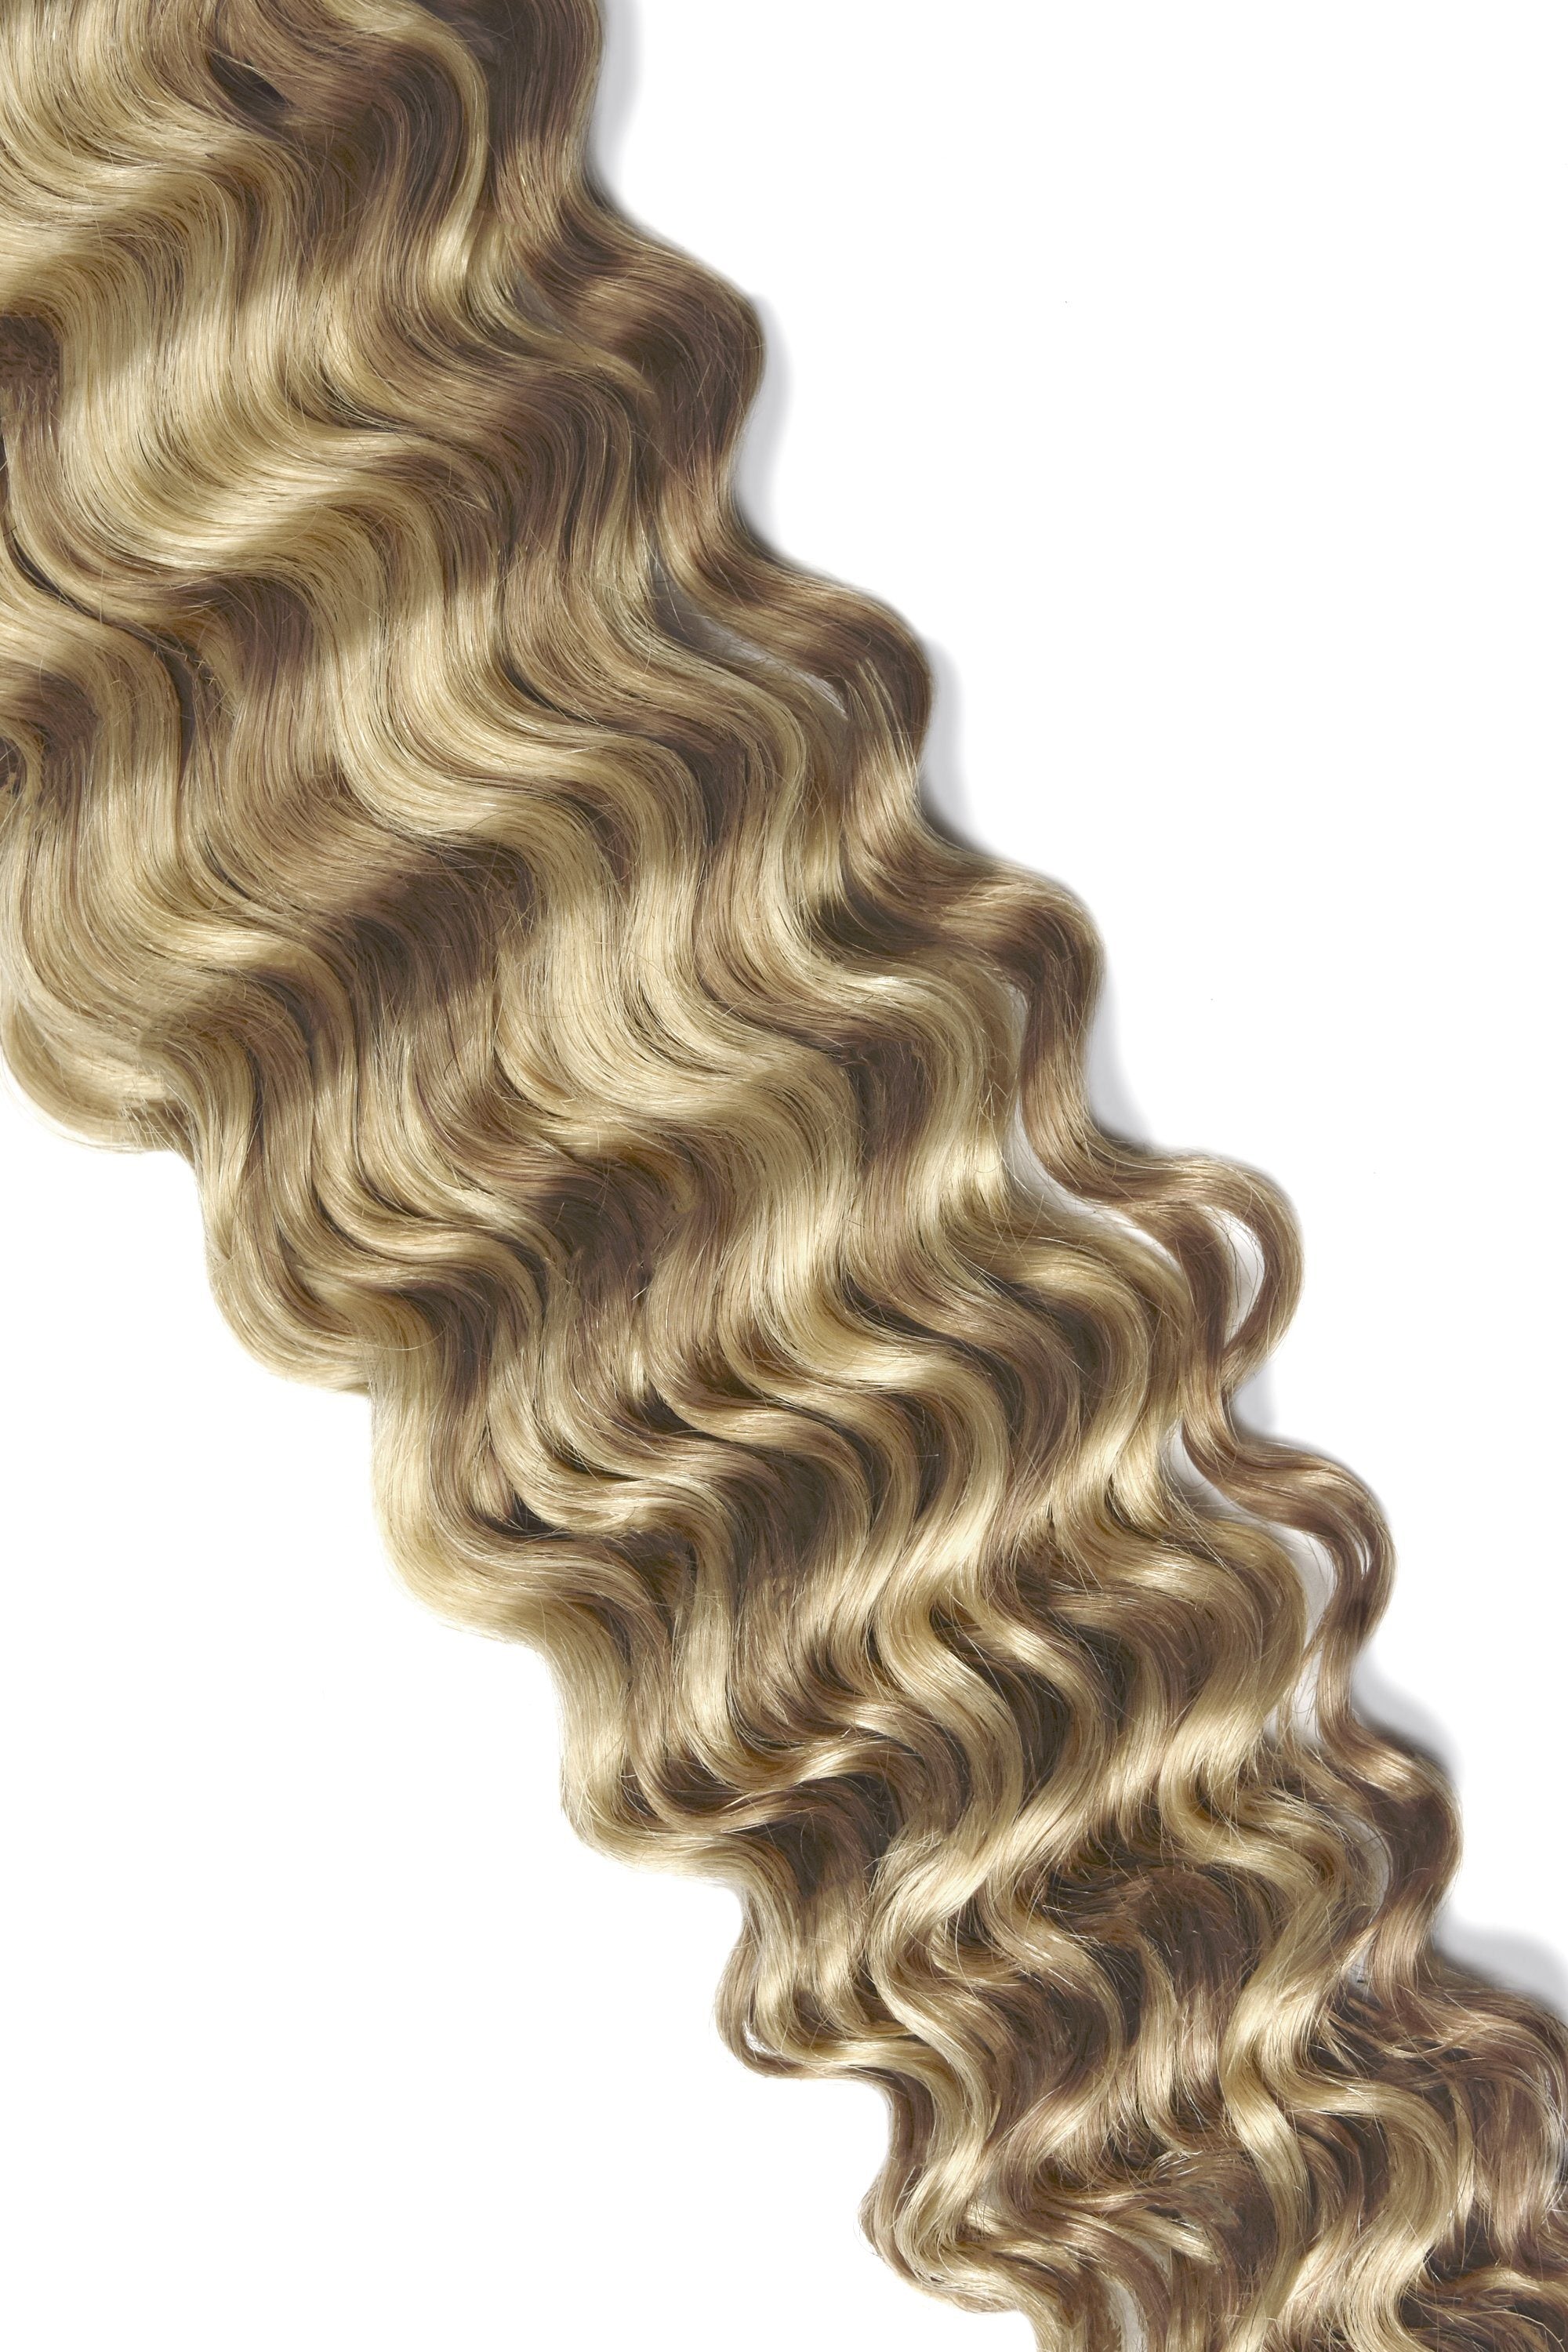 Curly Full Head Remy Clip in Human Hair Extensions - Lightest Brown/Bleach Blonde Mix (#18/613) Curly Clip In Hair Extensions cliphair 